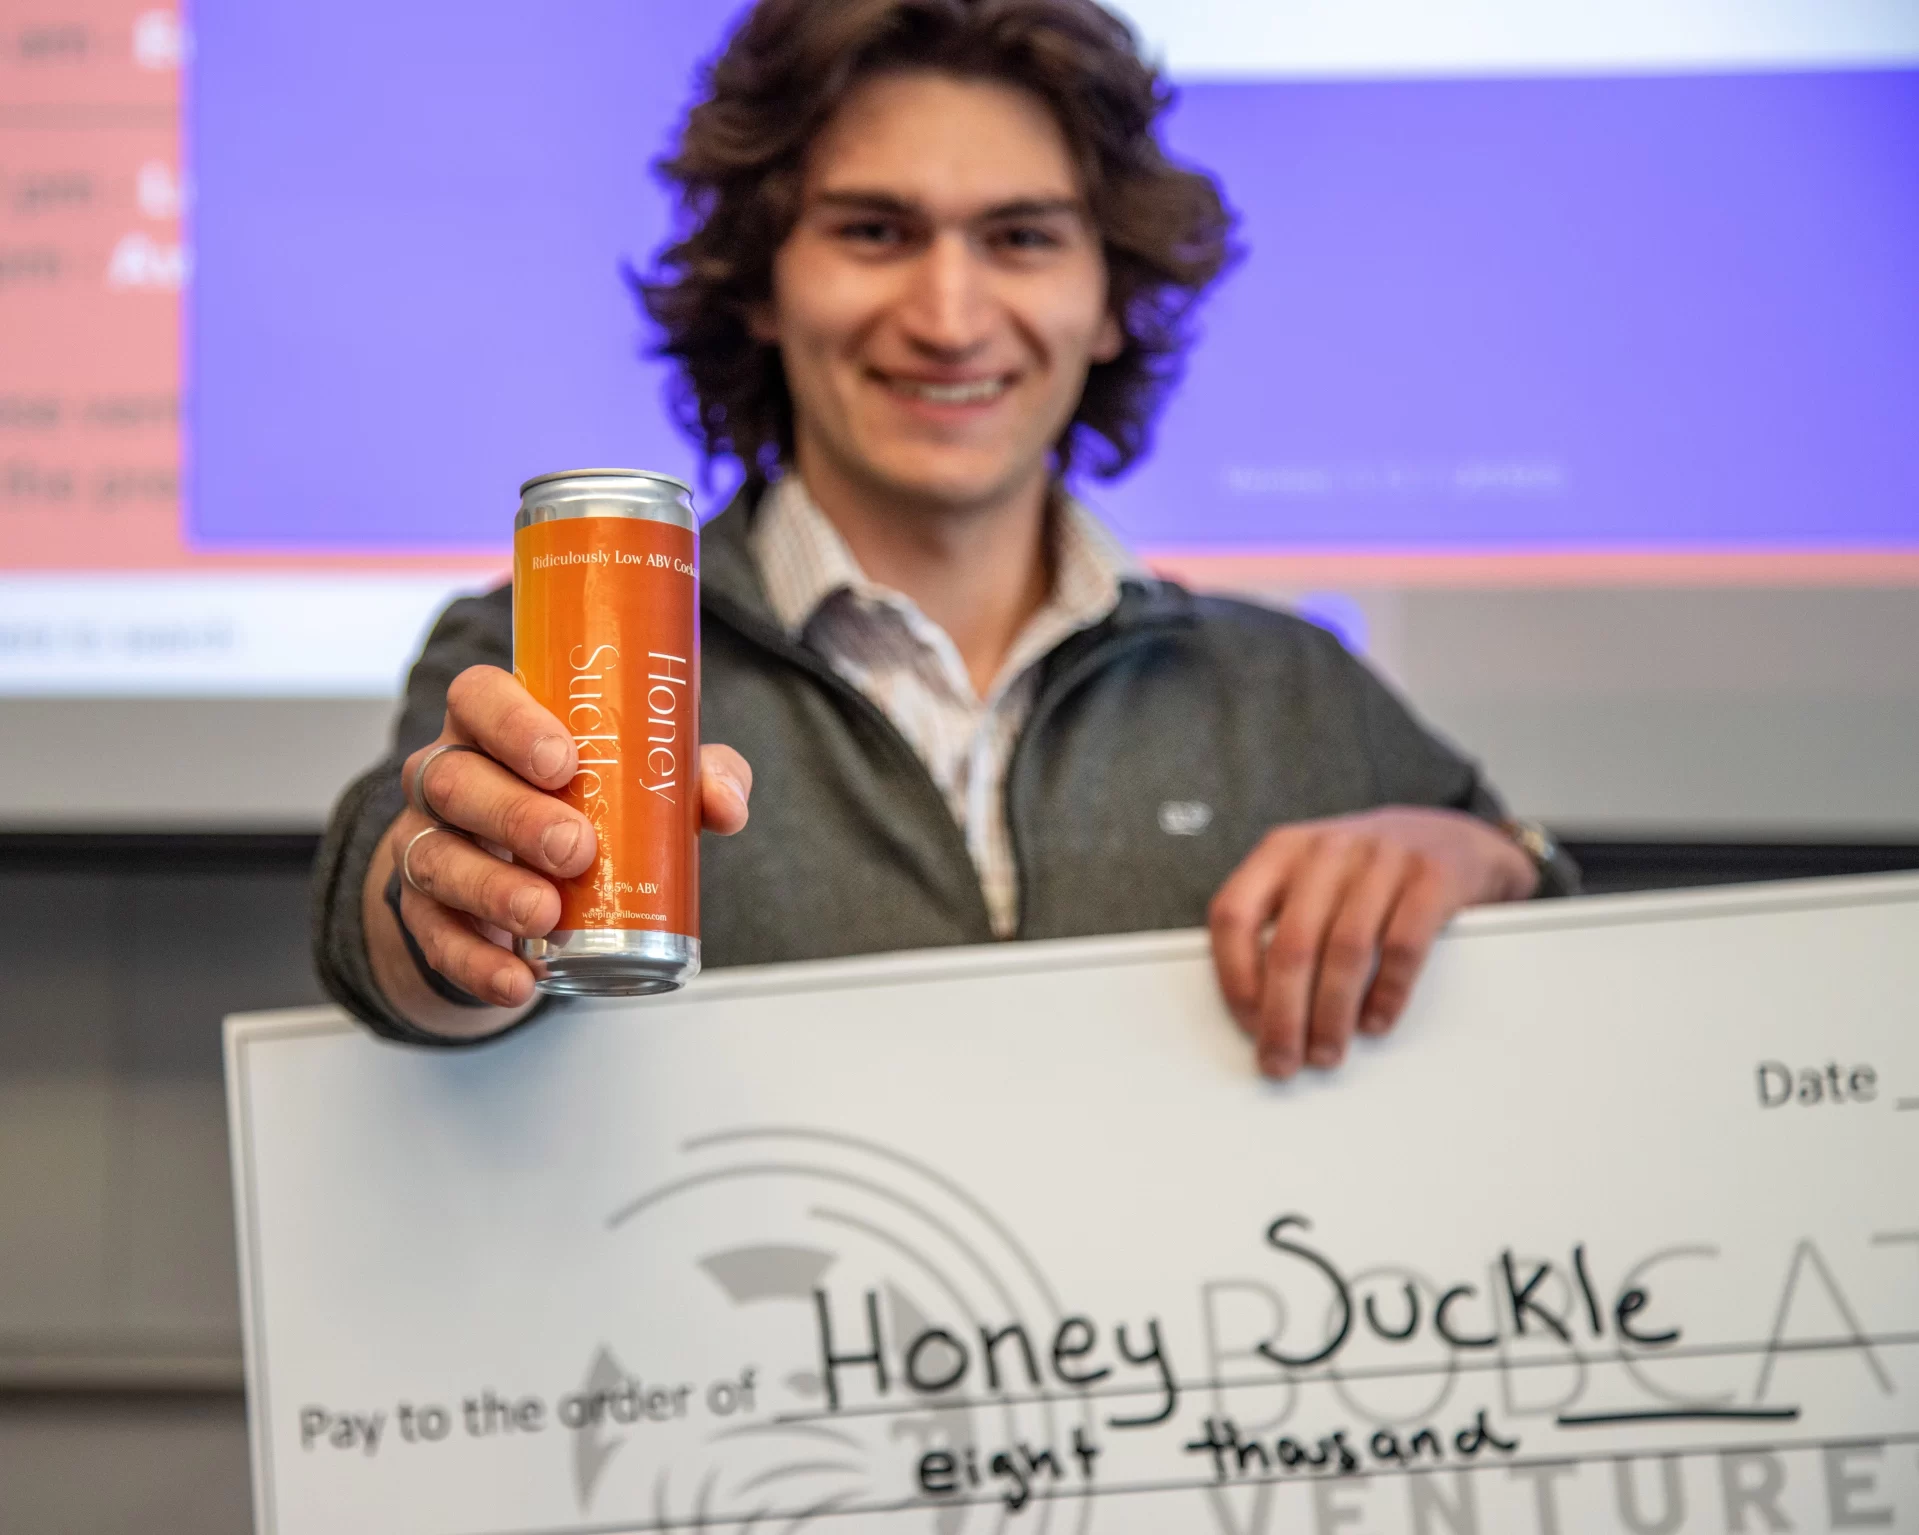 Bates students competed in Bobcat Ventures on April 6, presenting in front of alumni entrepreneurs for cash prizes for their business ideas. The top prize of $8,000 was won by Aidan Stark-Chessa for his non-alcoholic drink, HoneySuckle. Stark-Chessa poses with his check and his product, HoneySuckle.